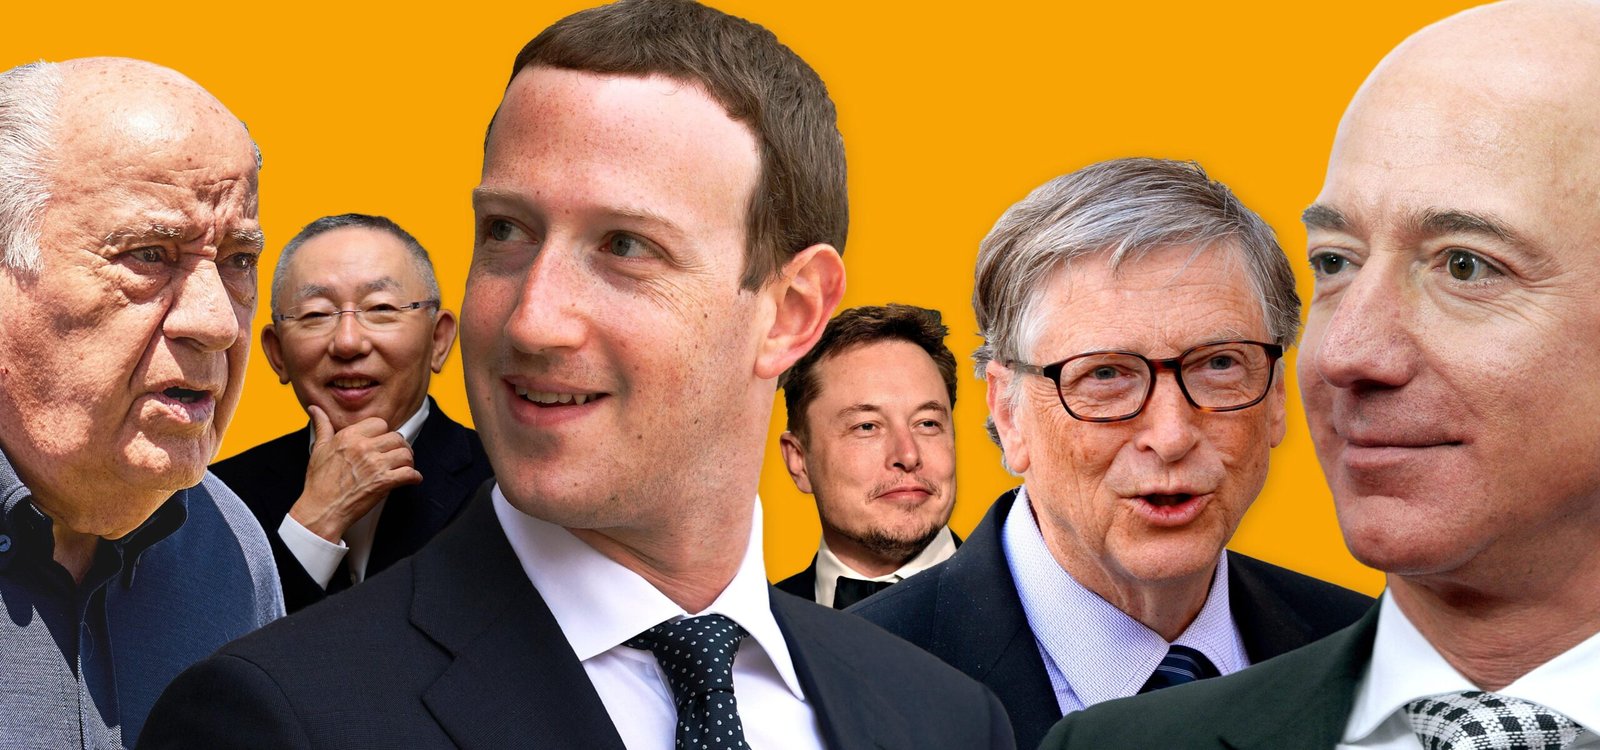 Know the first job of these 7 billionaires